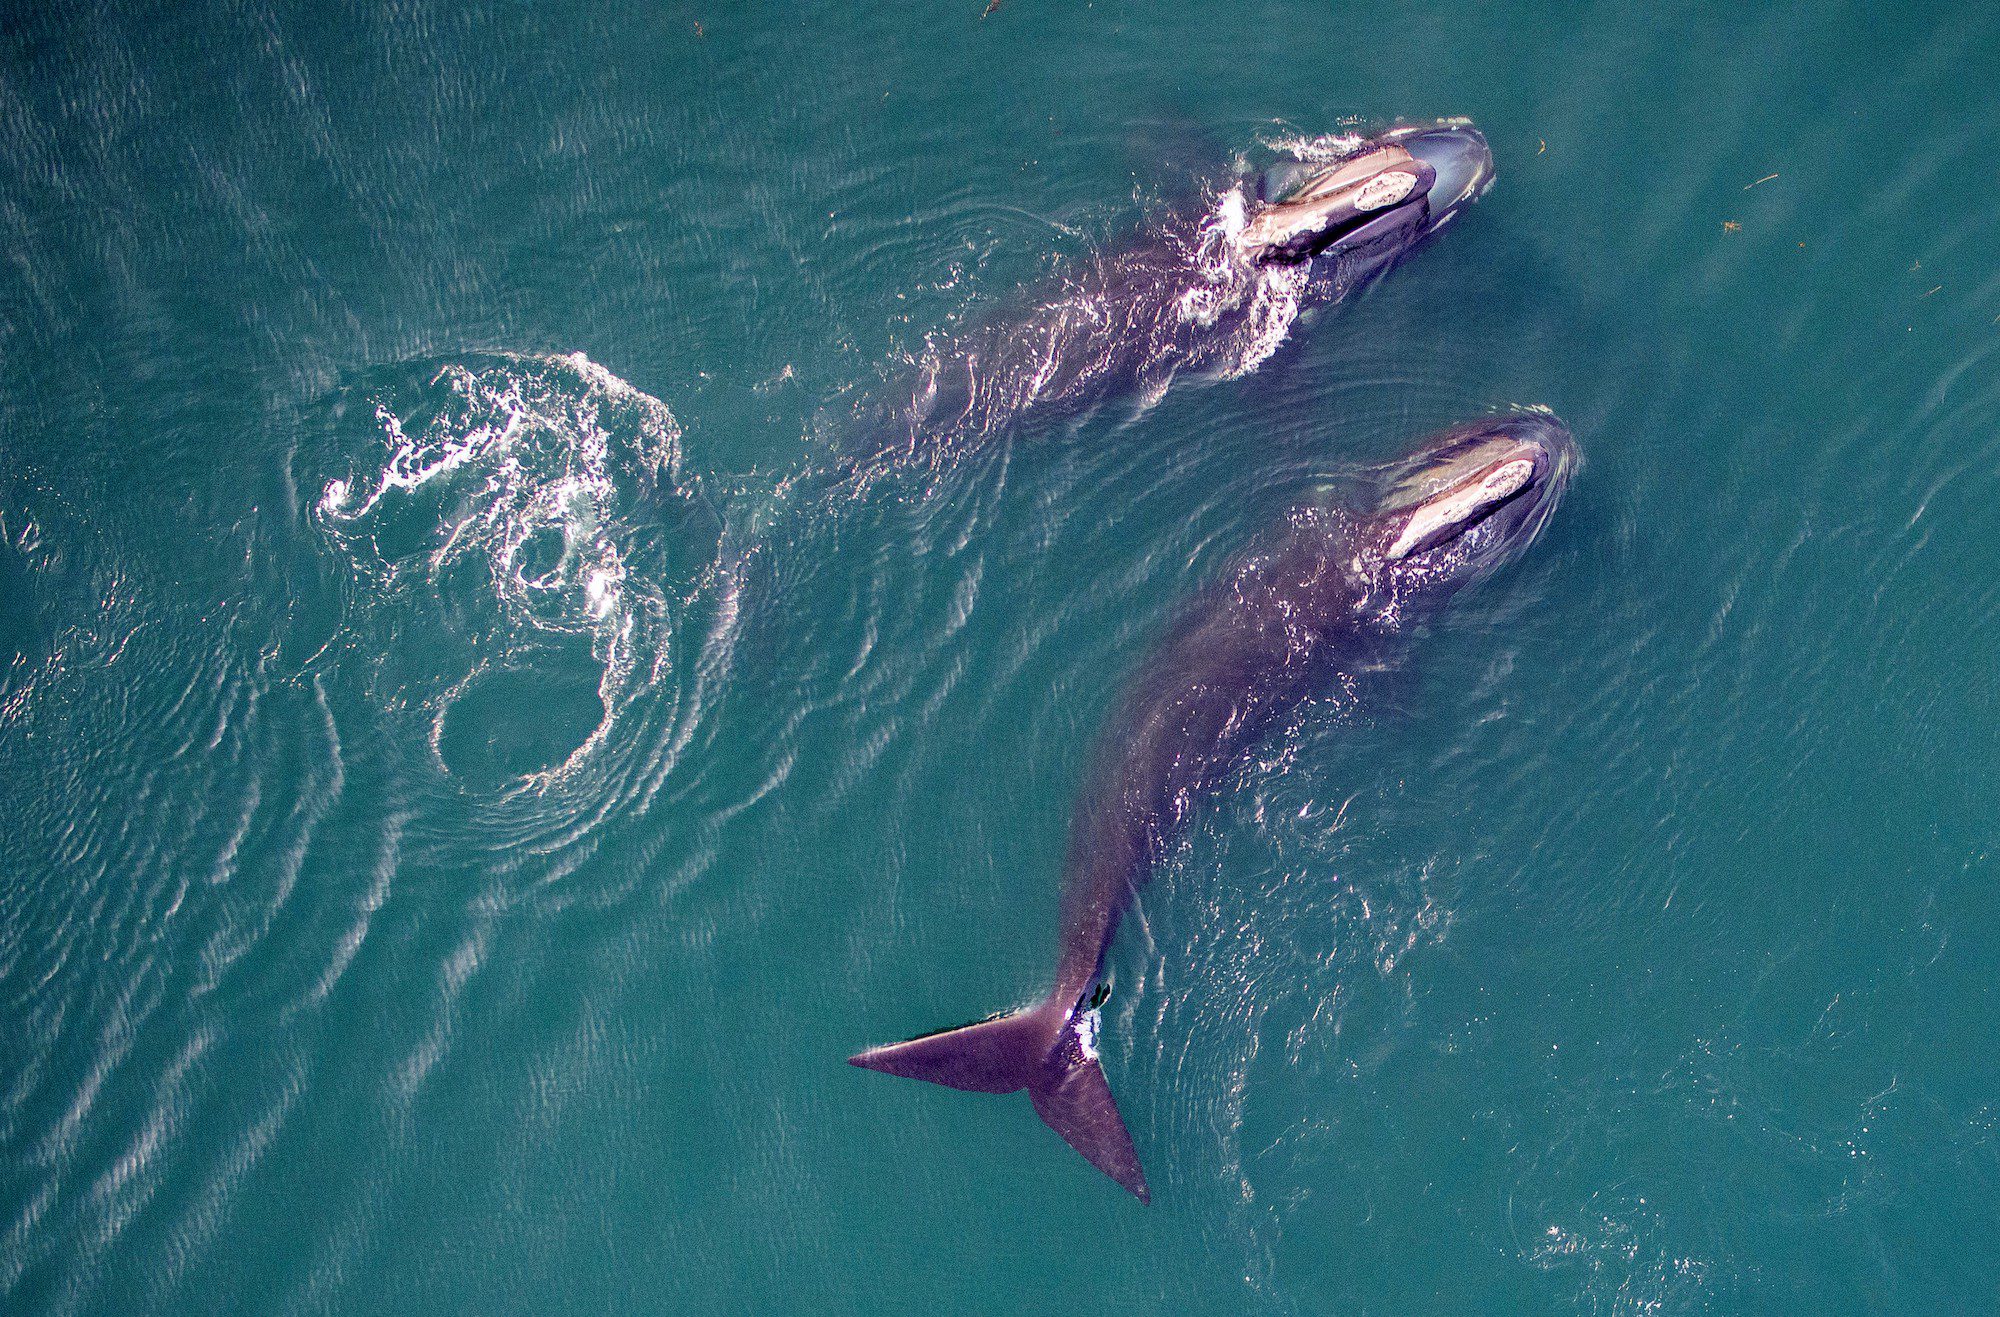 Recognizing Massachusetts Right Whale Day